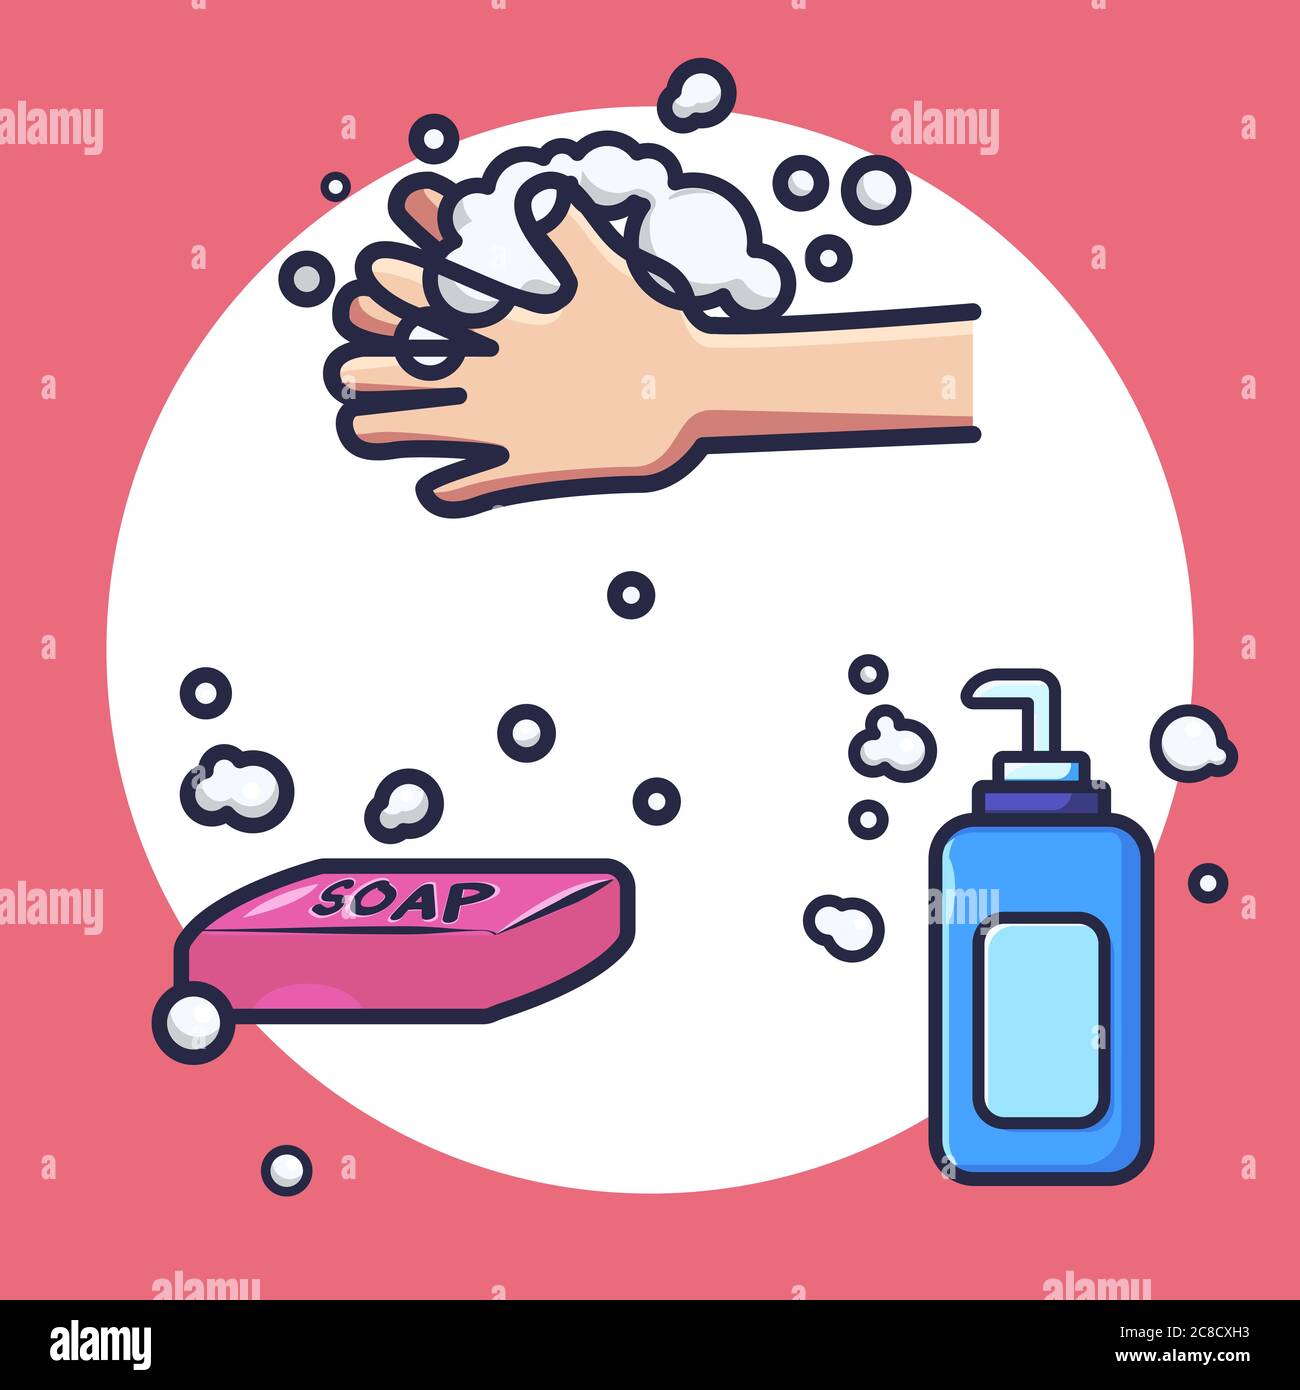 washing hands with soap cartoon